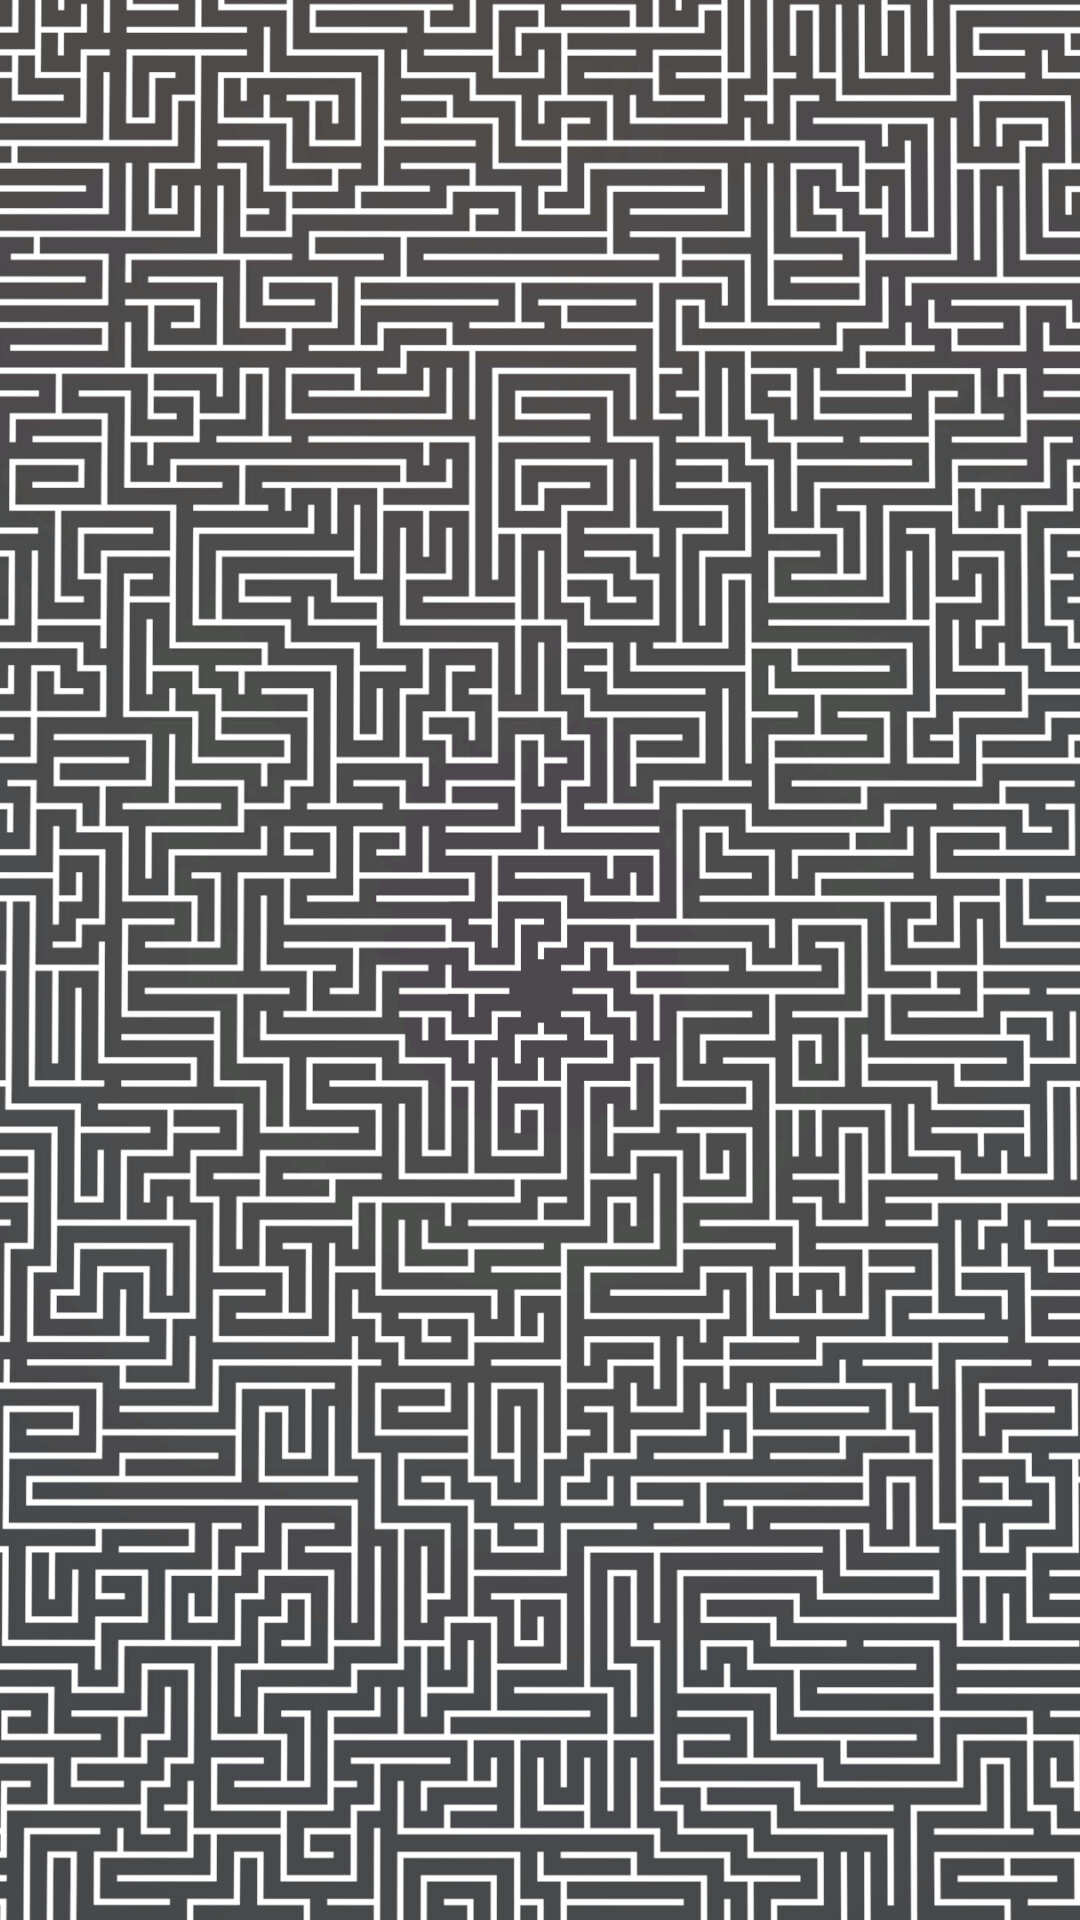 Labyrinth: A puzzle with twists and turns, A complicated and confusing system of connected passages. 1080x1920 Full HD Wallpaper.